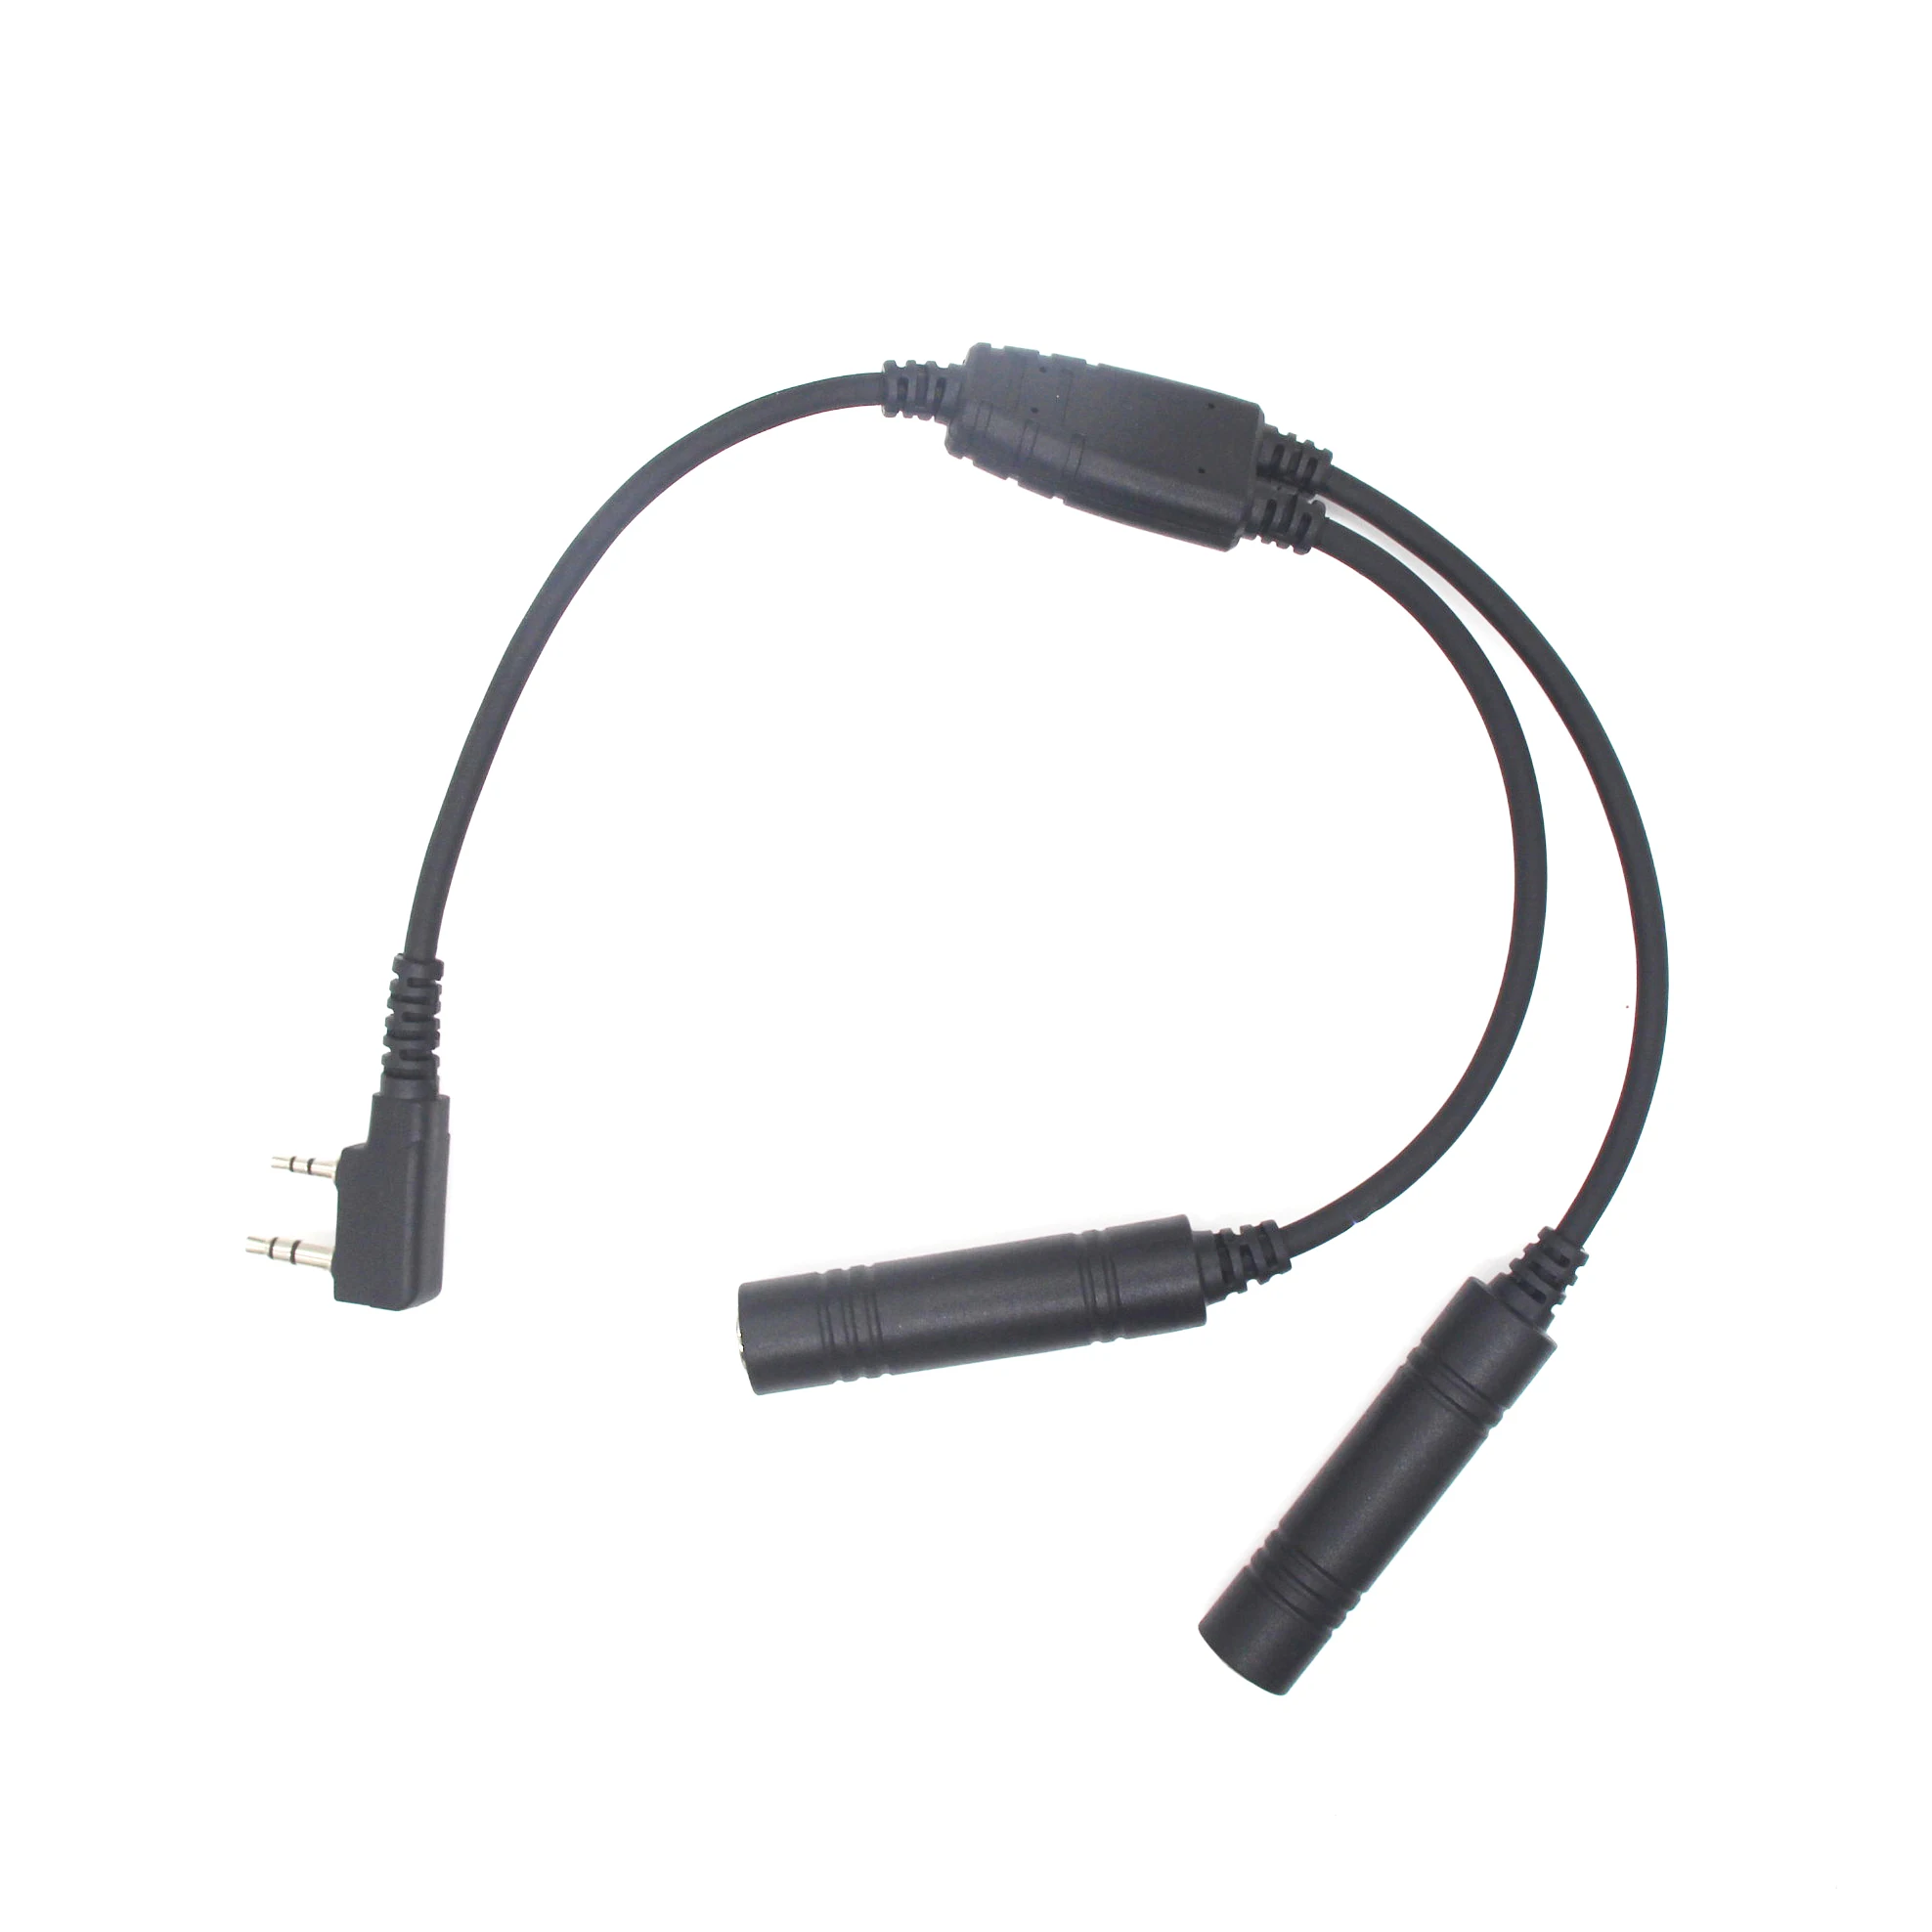 

General Aviation Helicopter Radio Mic Headset Adapter Extension Cable 2-Pin K port to U-174/U For Kenwood for Baofeng